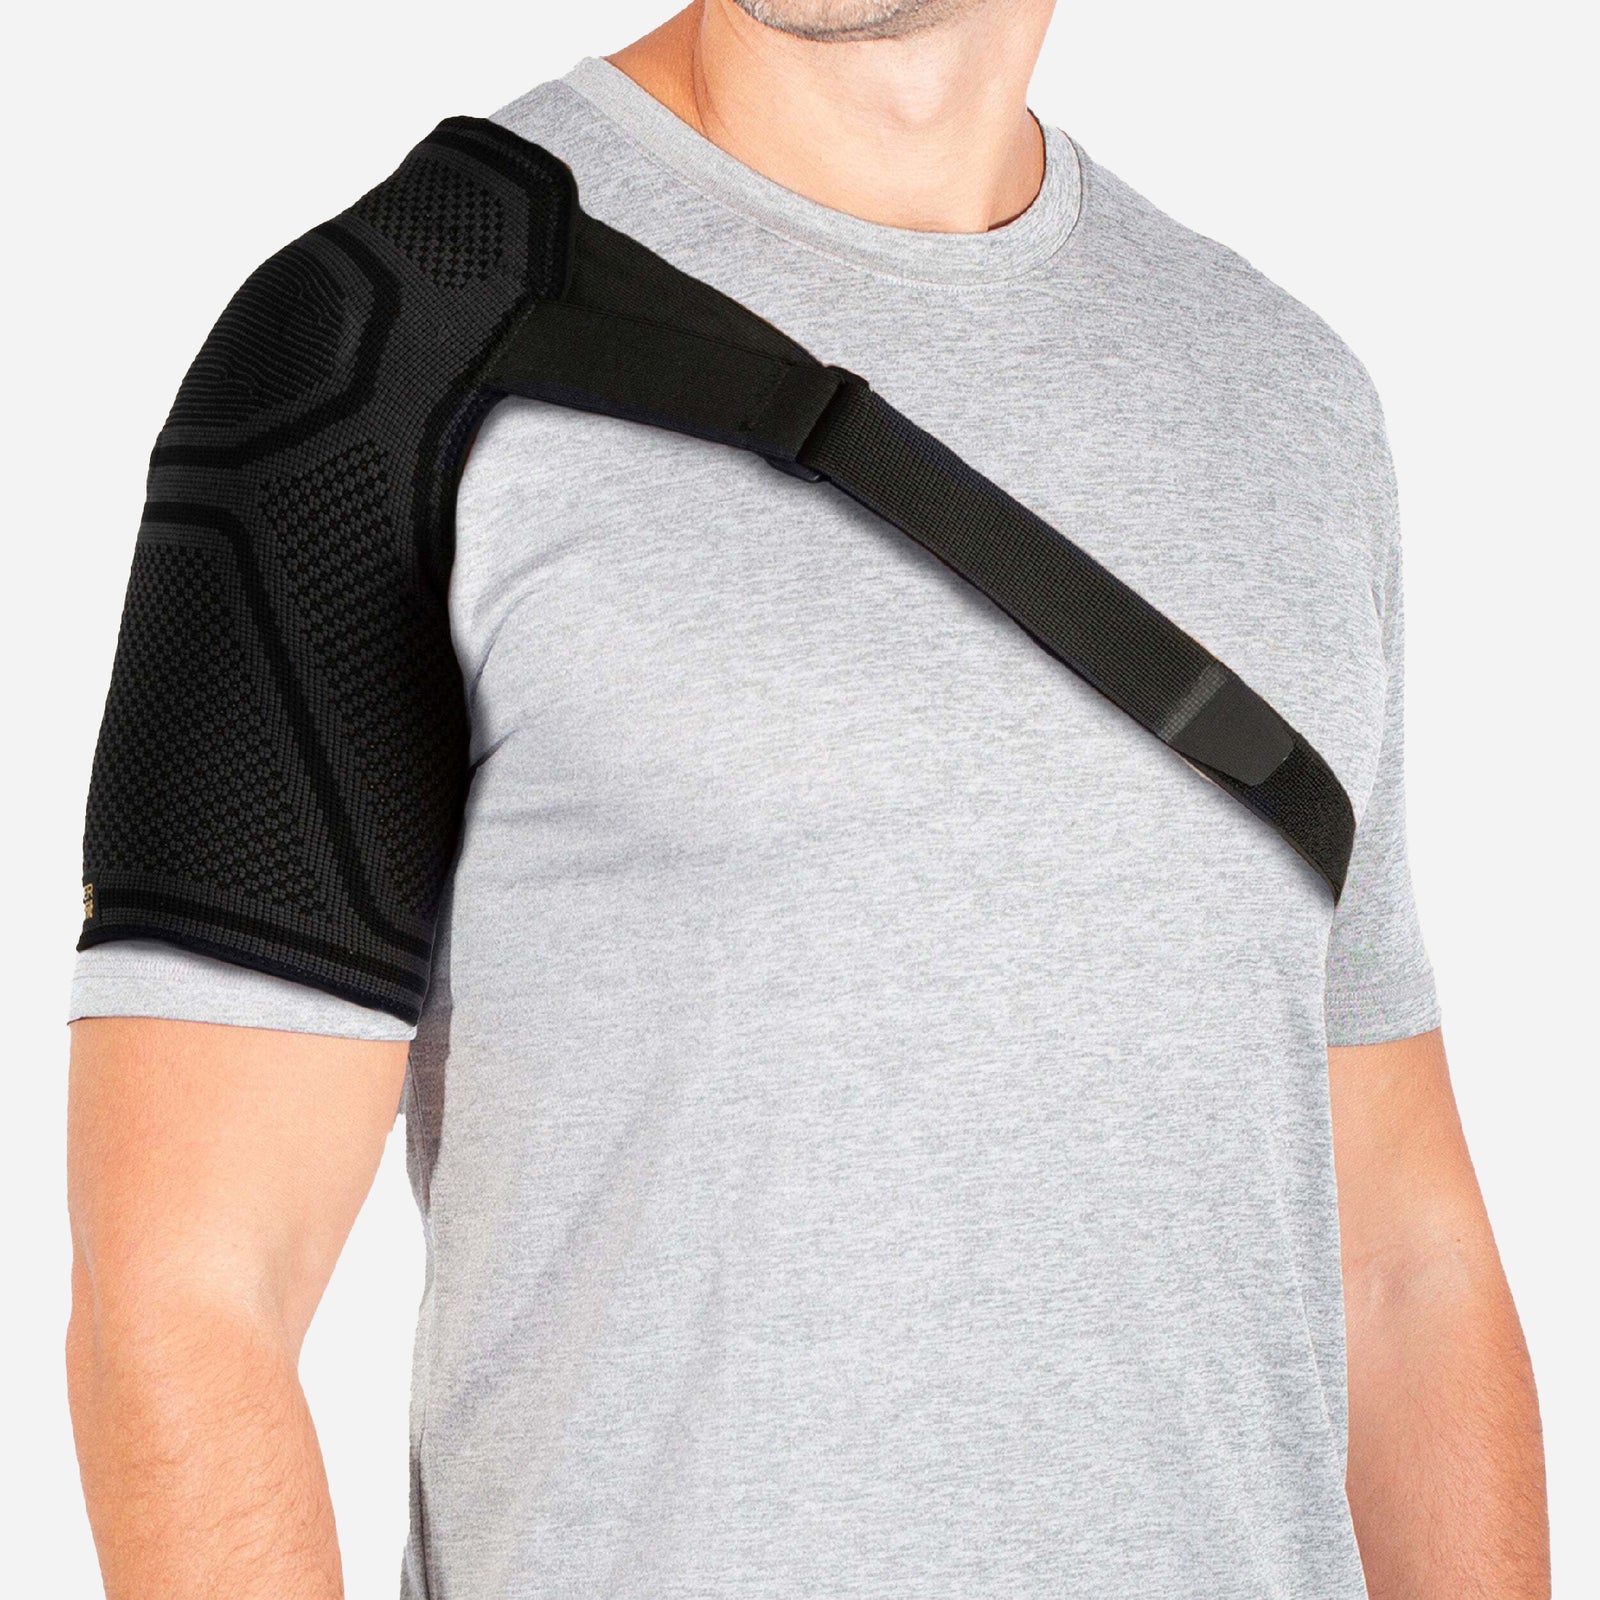 Copper Fit Men€™s Compression Performance Base Layer Short Sleeve T-Shirt,  X-Large, As Seen on TV 